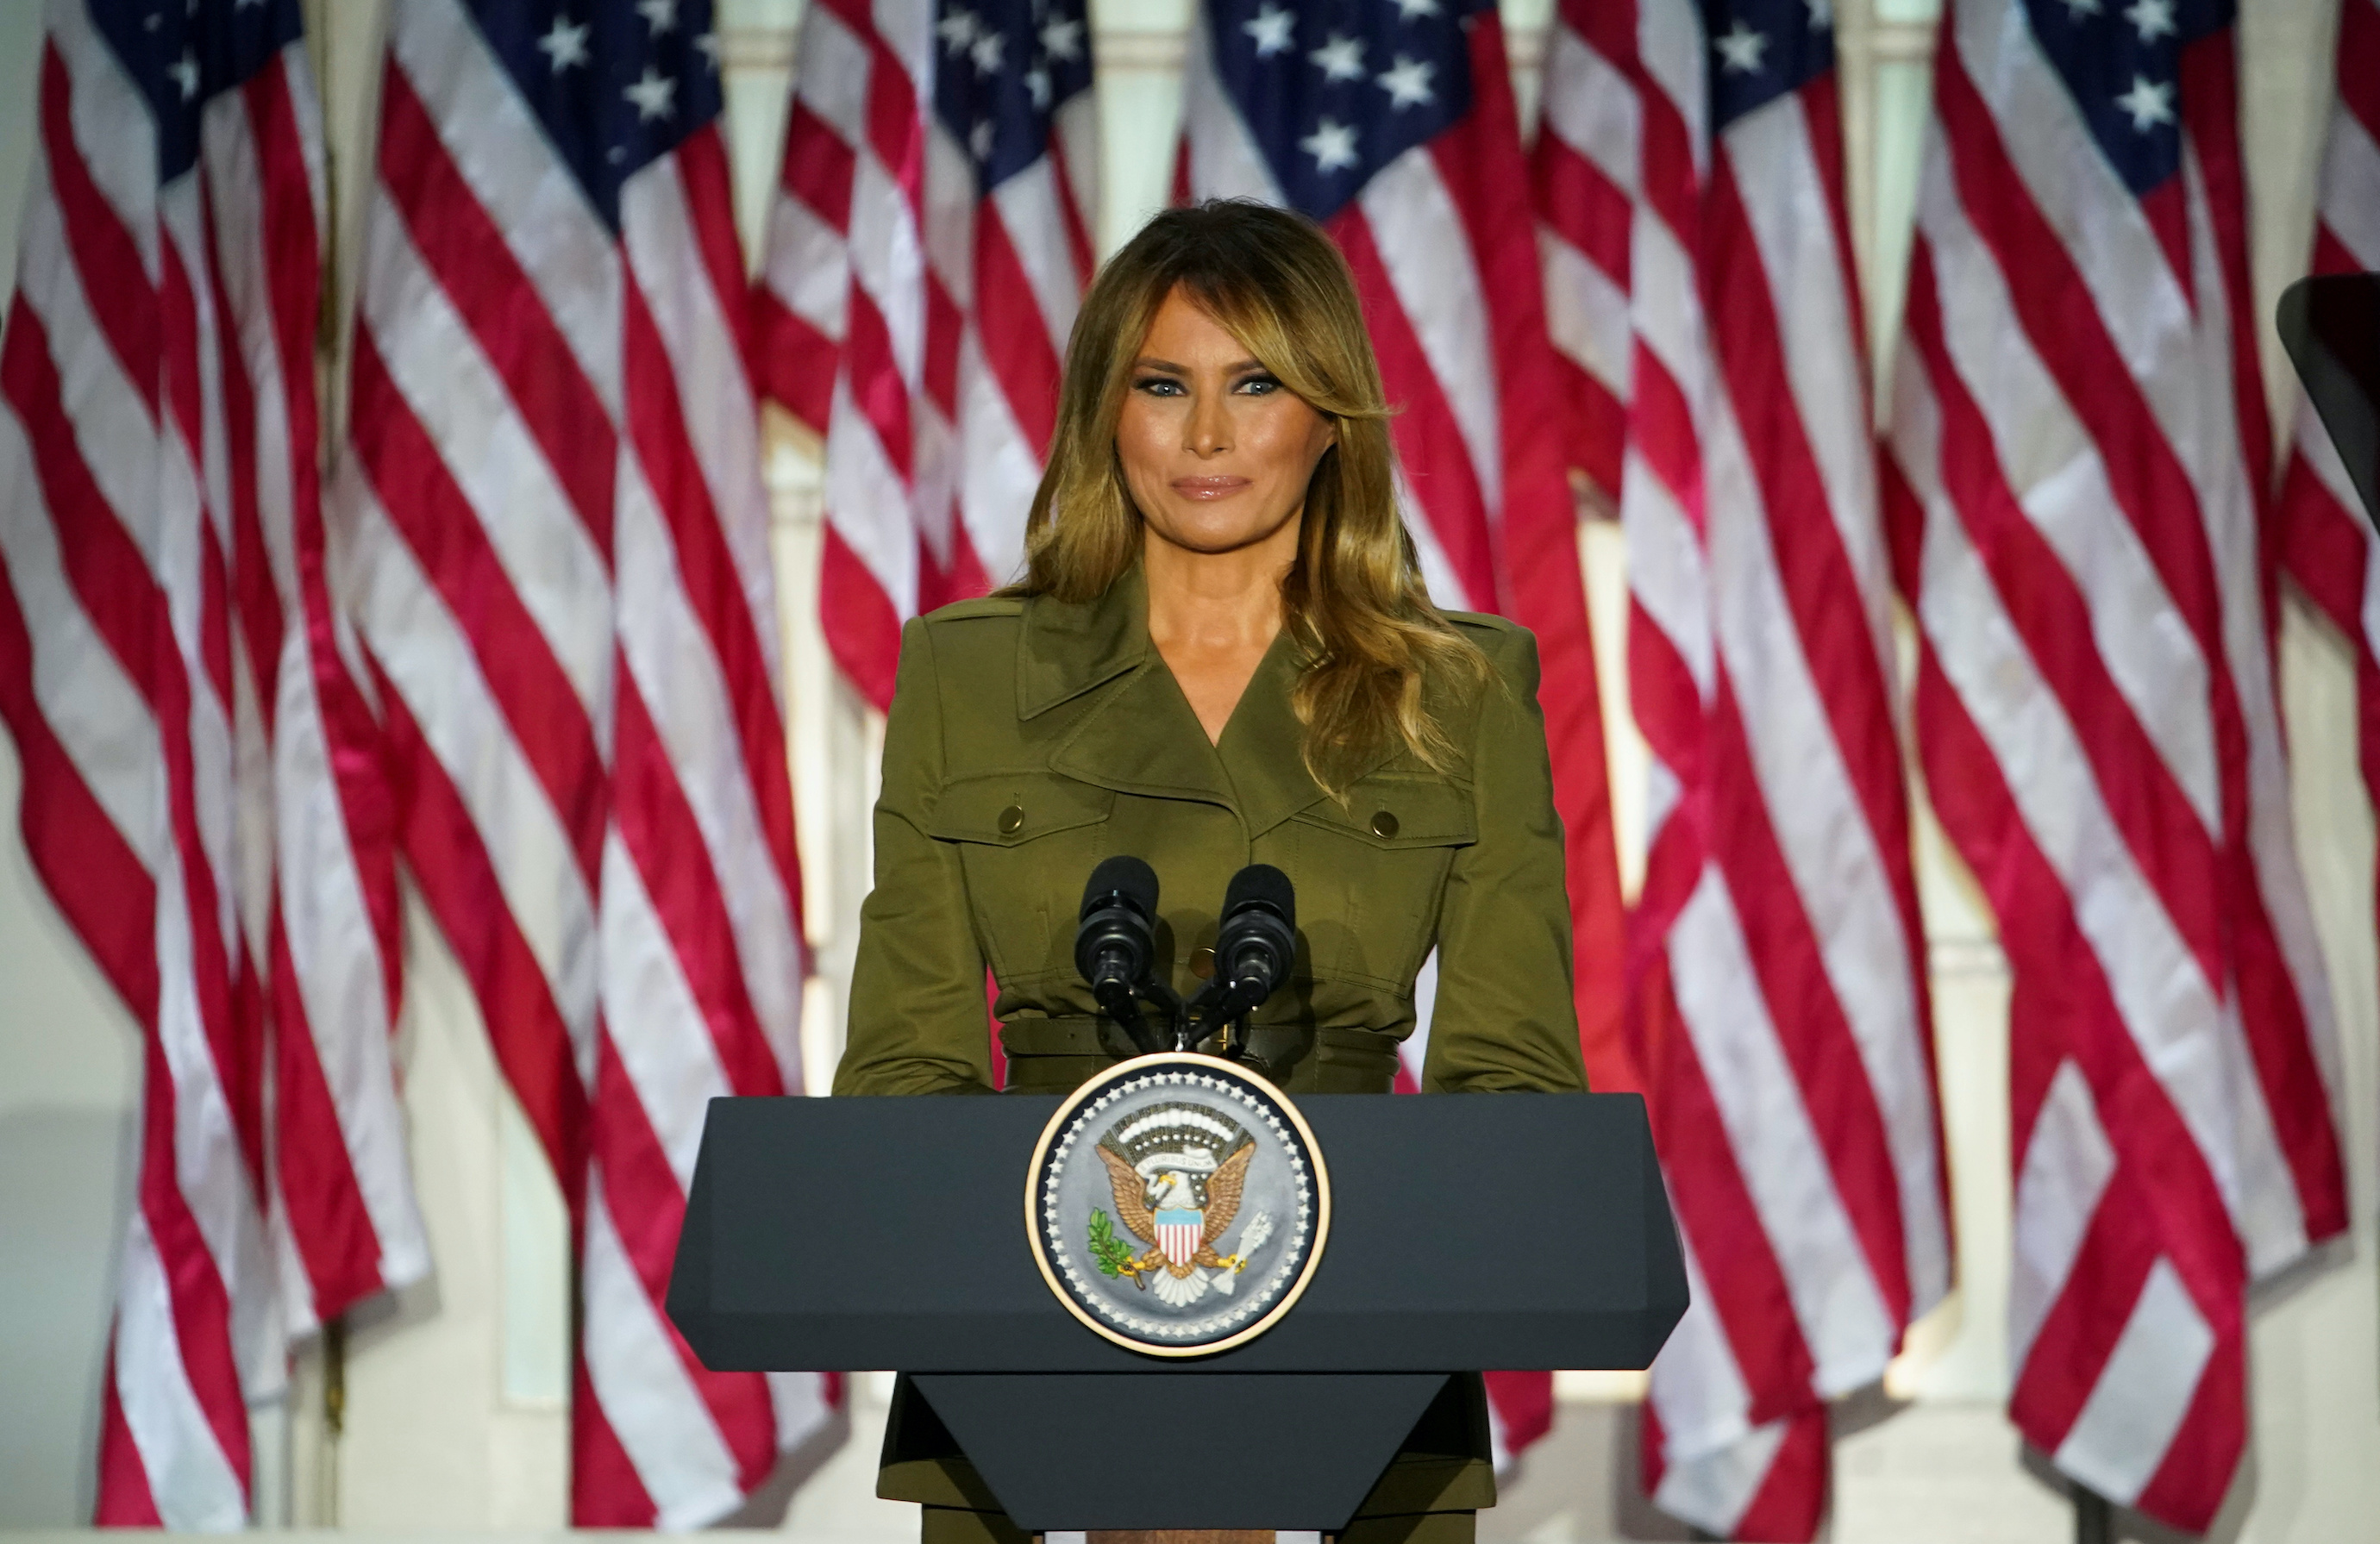 Melania Trump can teach the president about how to talk to women voters